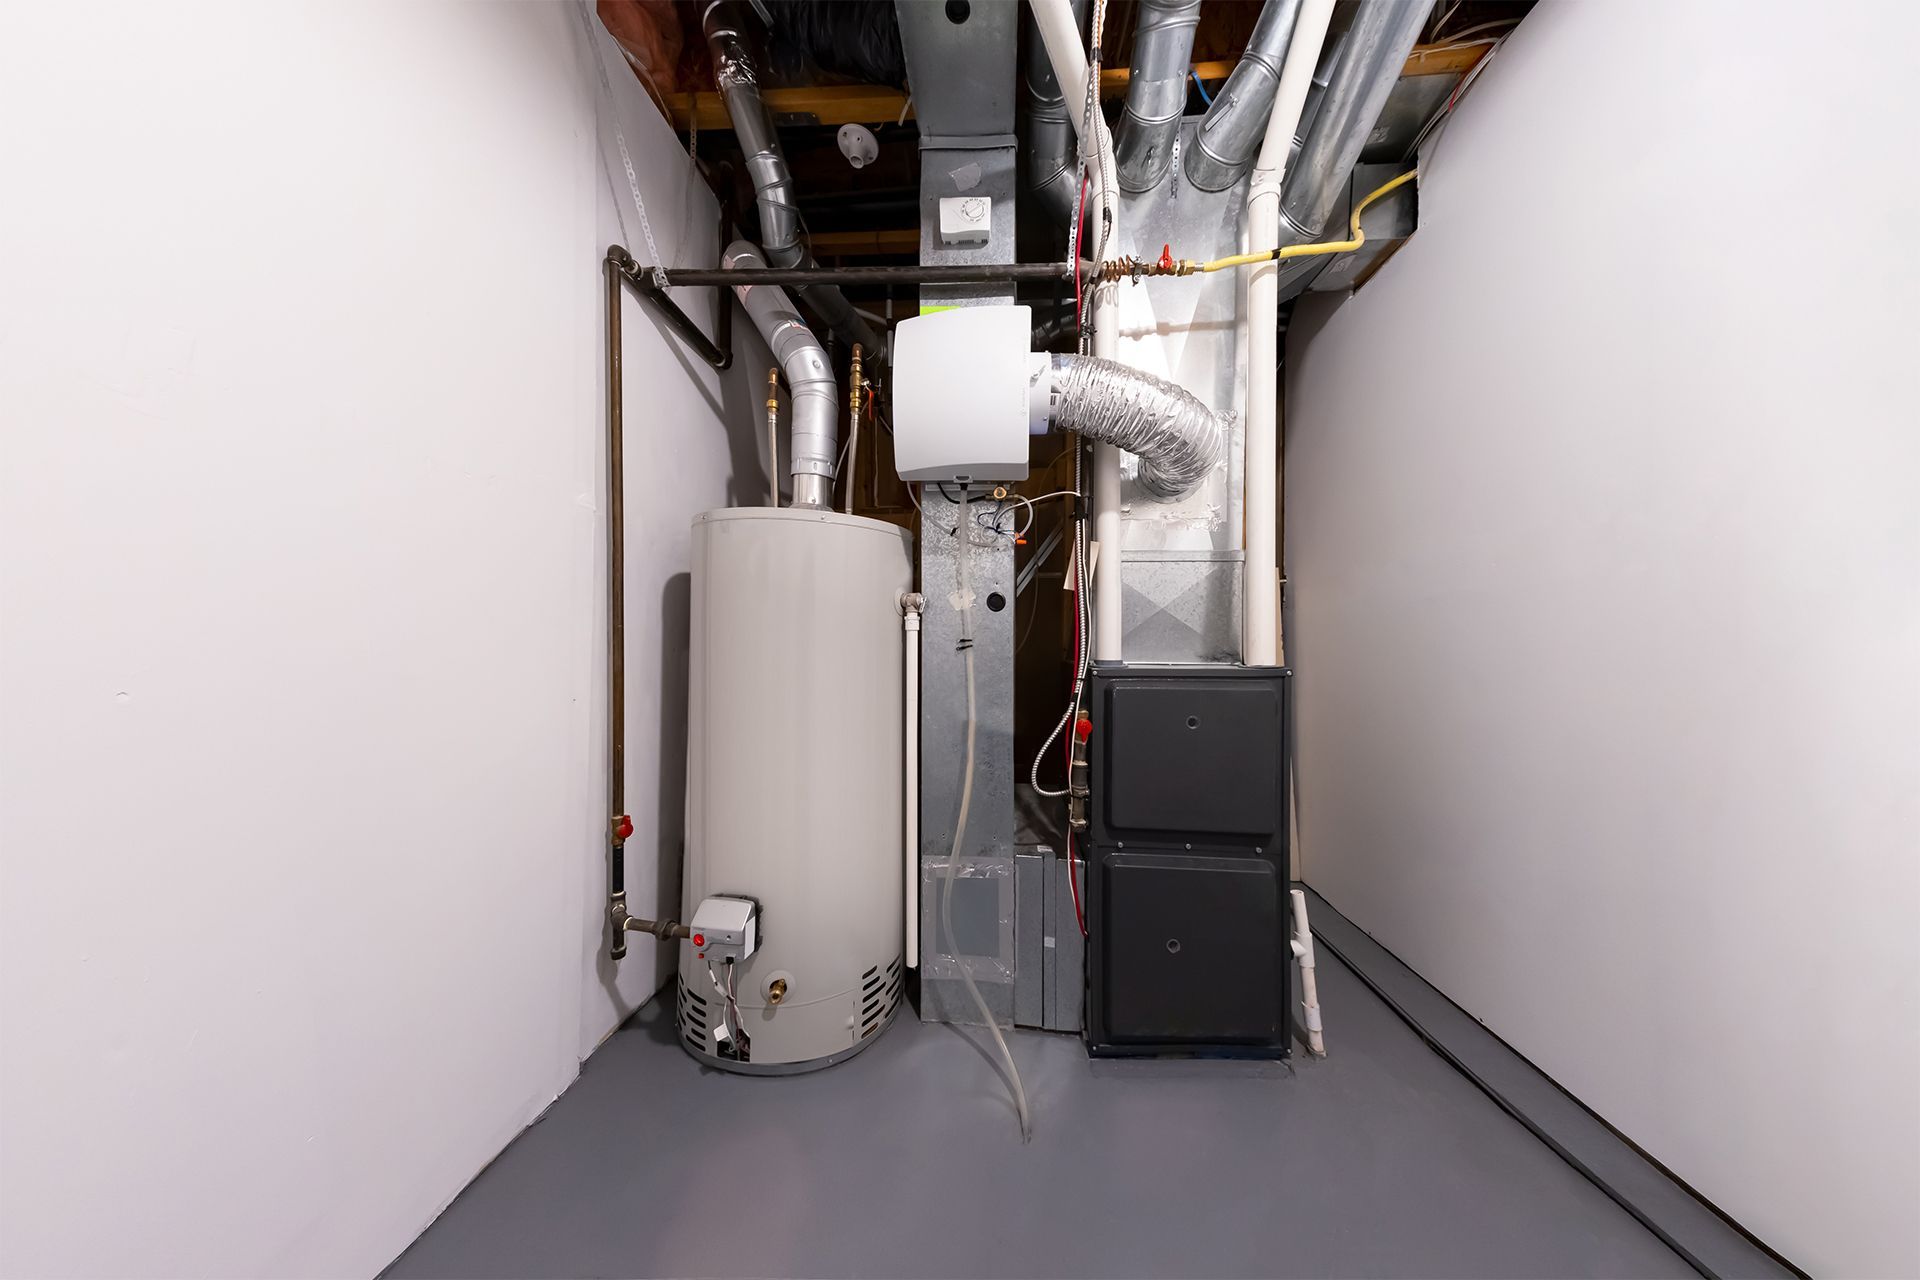 Residential Furnace And Air Duct System